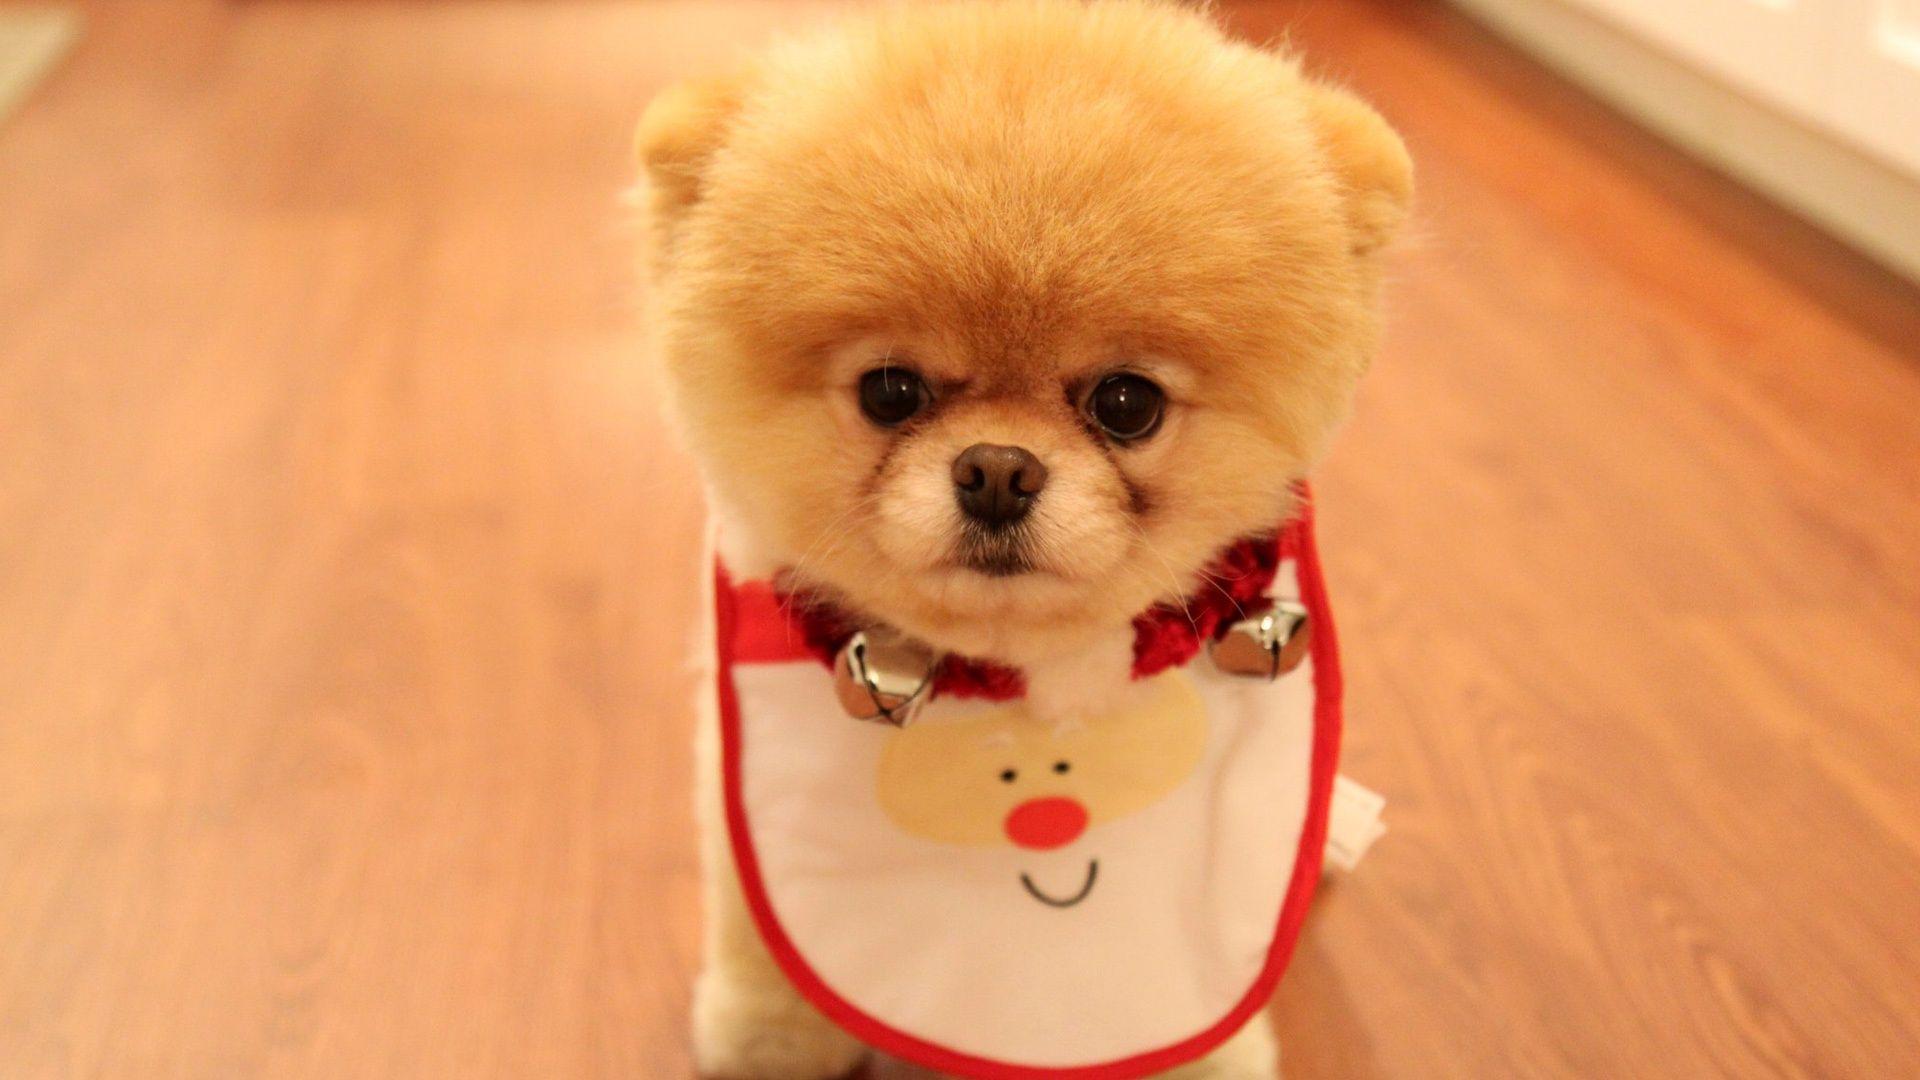 Cute Dog Christmas Wallpaper in jpg format for free download